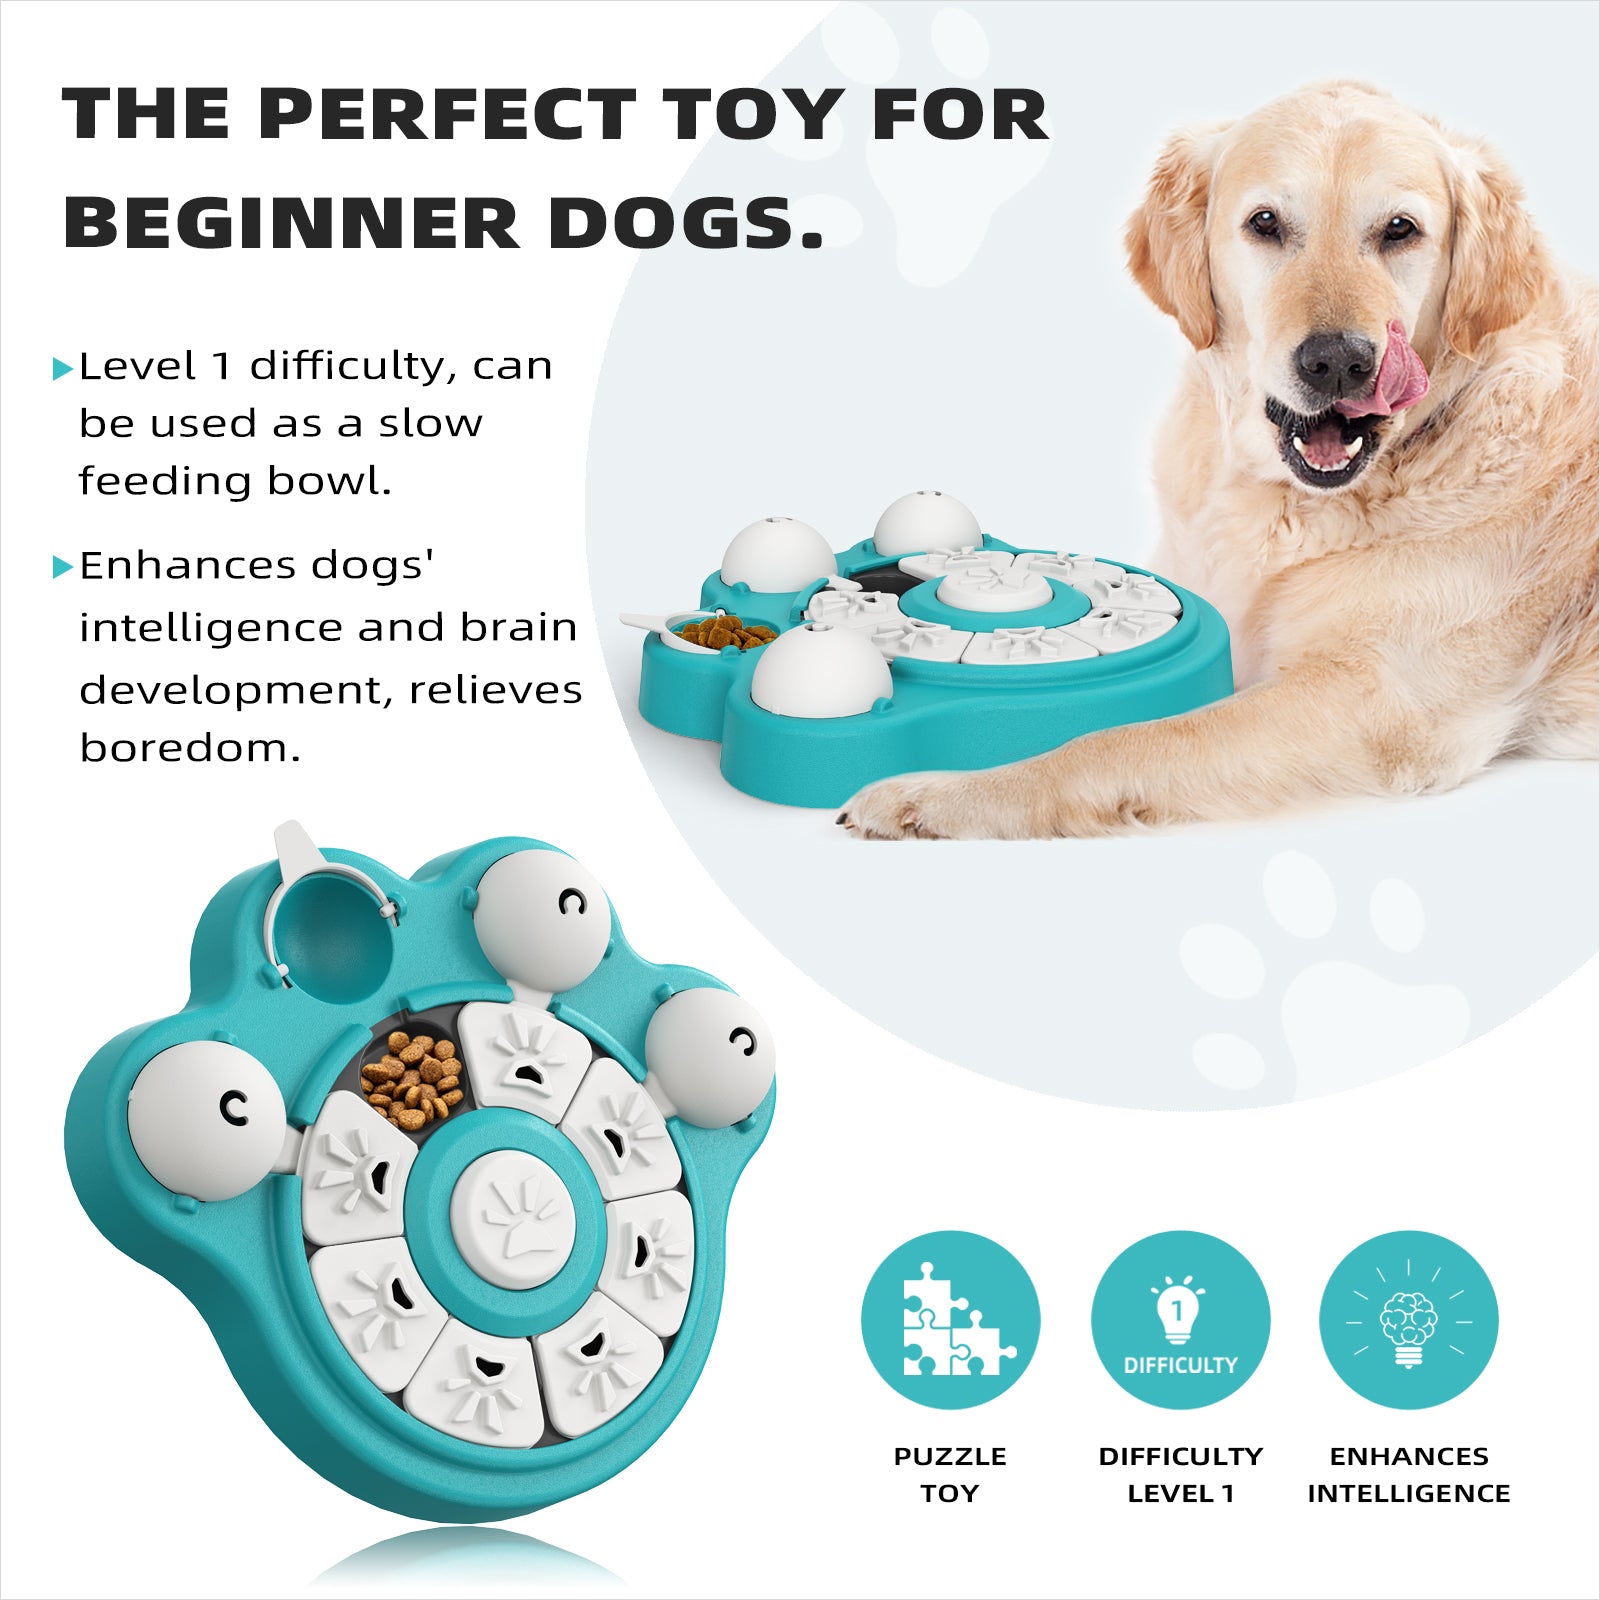 KADTC Dog Puzzle Toy Dogs Brain Mental Stimulation Mentally Stimulating Toys Puppy Beginner Treat Food Puzzles Feeder Dispenser Level 1 Feeding Game for Small/Medium/Large Aggressive Chewers Breed